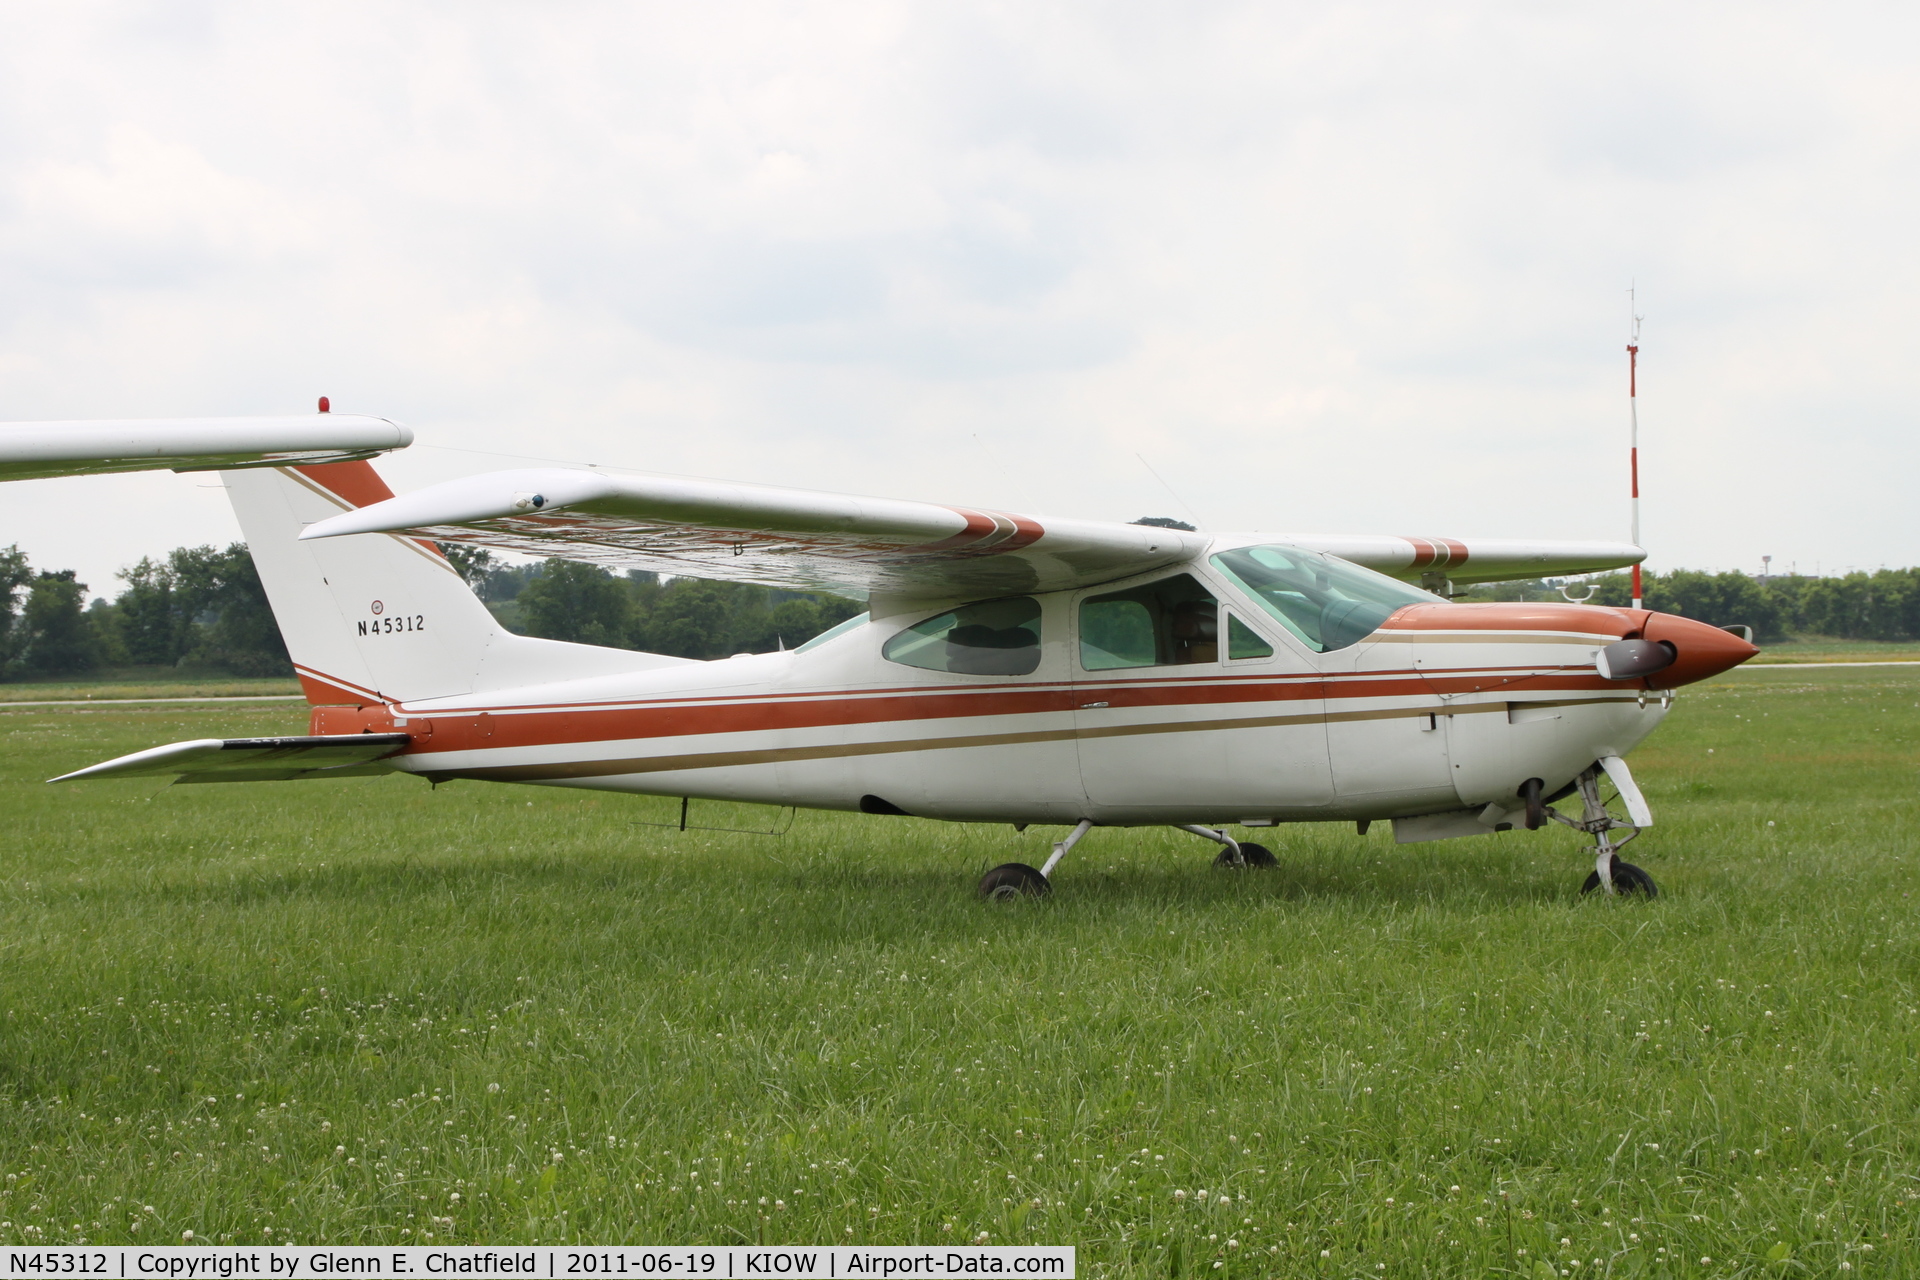 N45312, 1976 Cessna 177RG Cardinal C/N 177RG1102, Parked in the grass - overflow